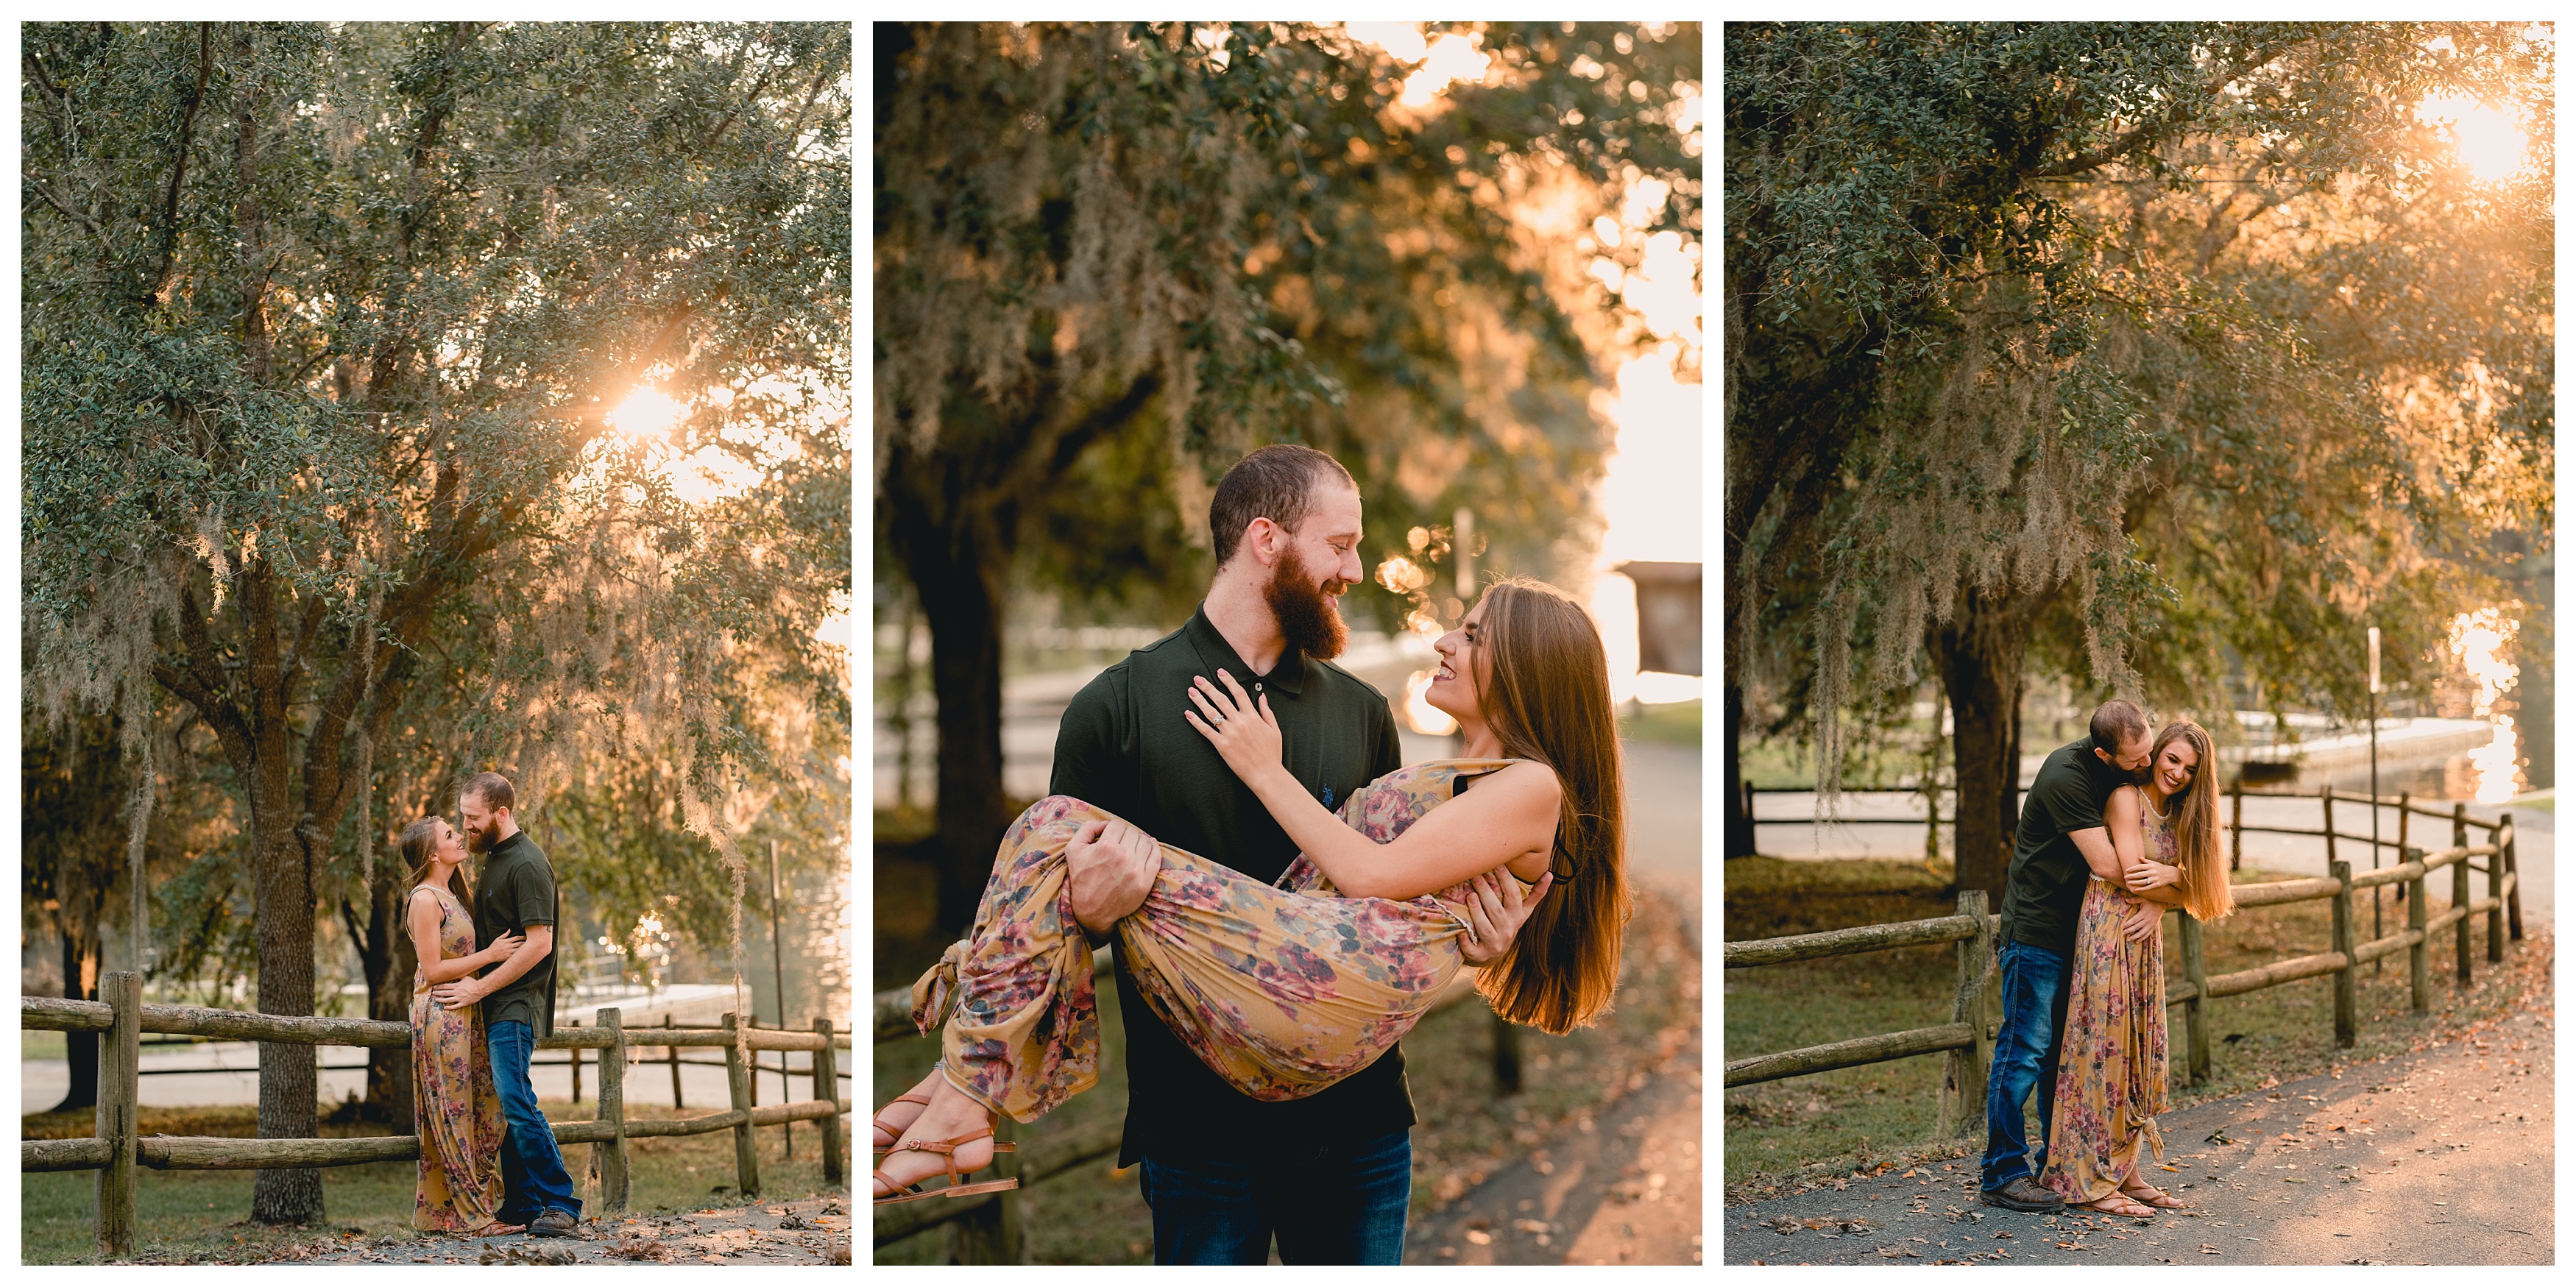 Different and natural posing for the engaged couple in Tallahassee, FL. Shelly Williams Photography